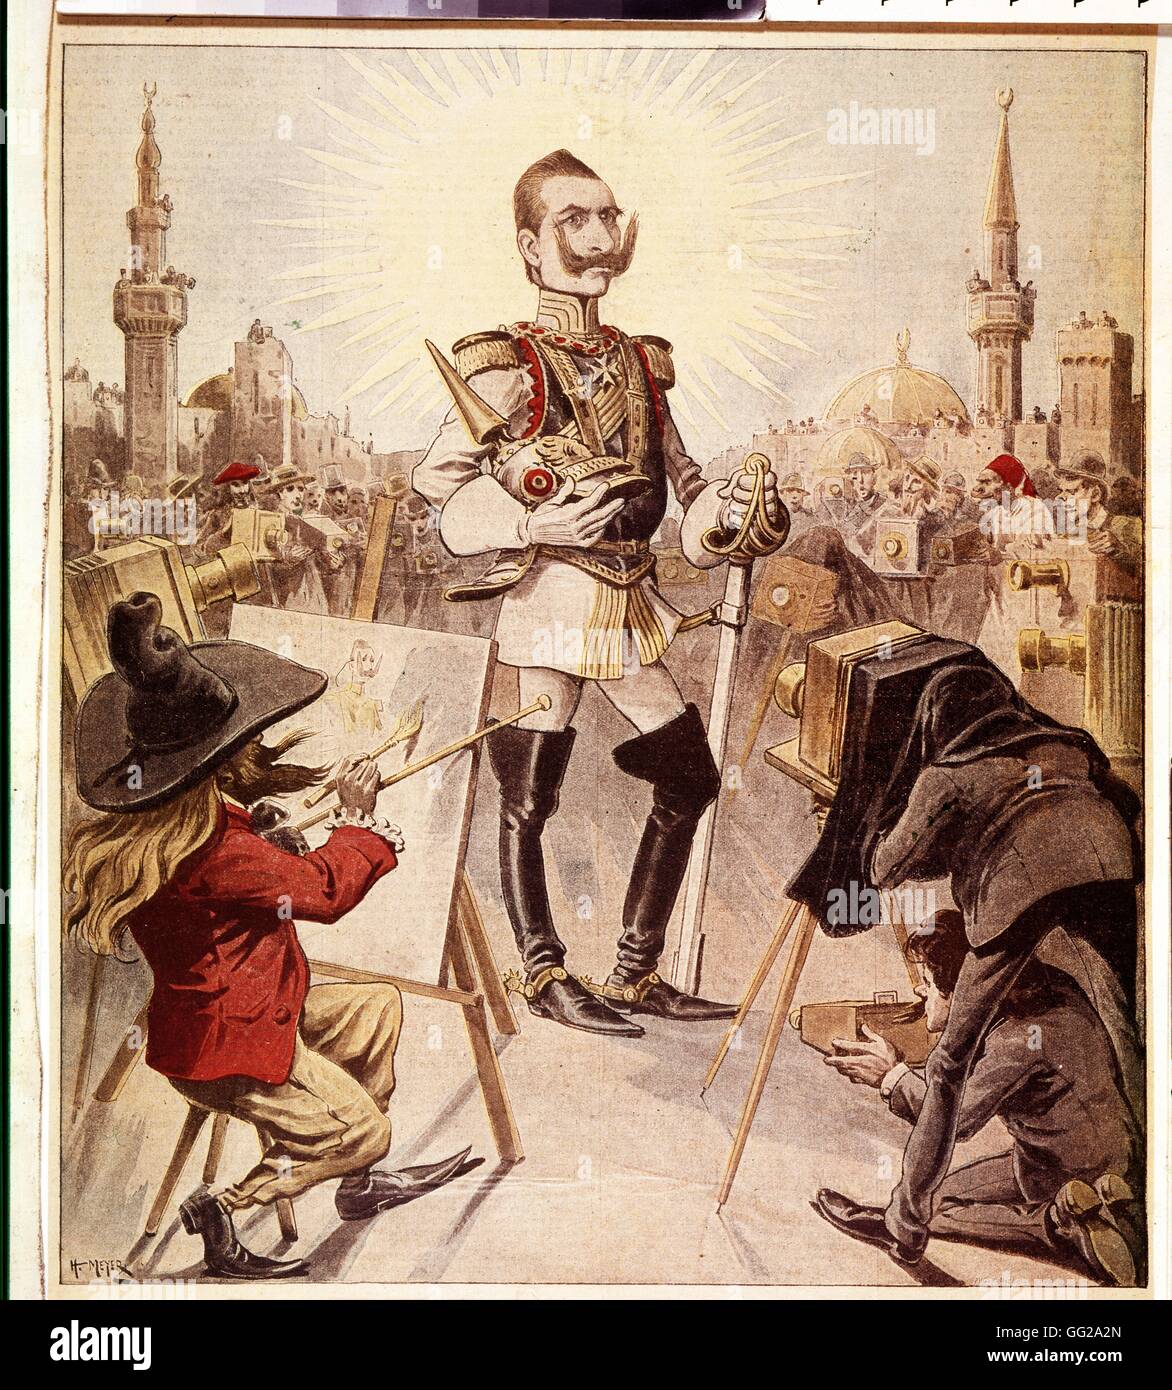 Caricature Emperor of Germany, Wilhelm II, on a journey  1898 Germany Stock Photo